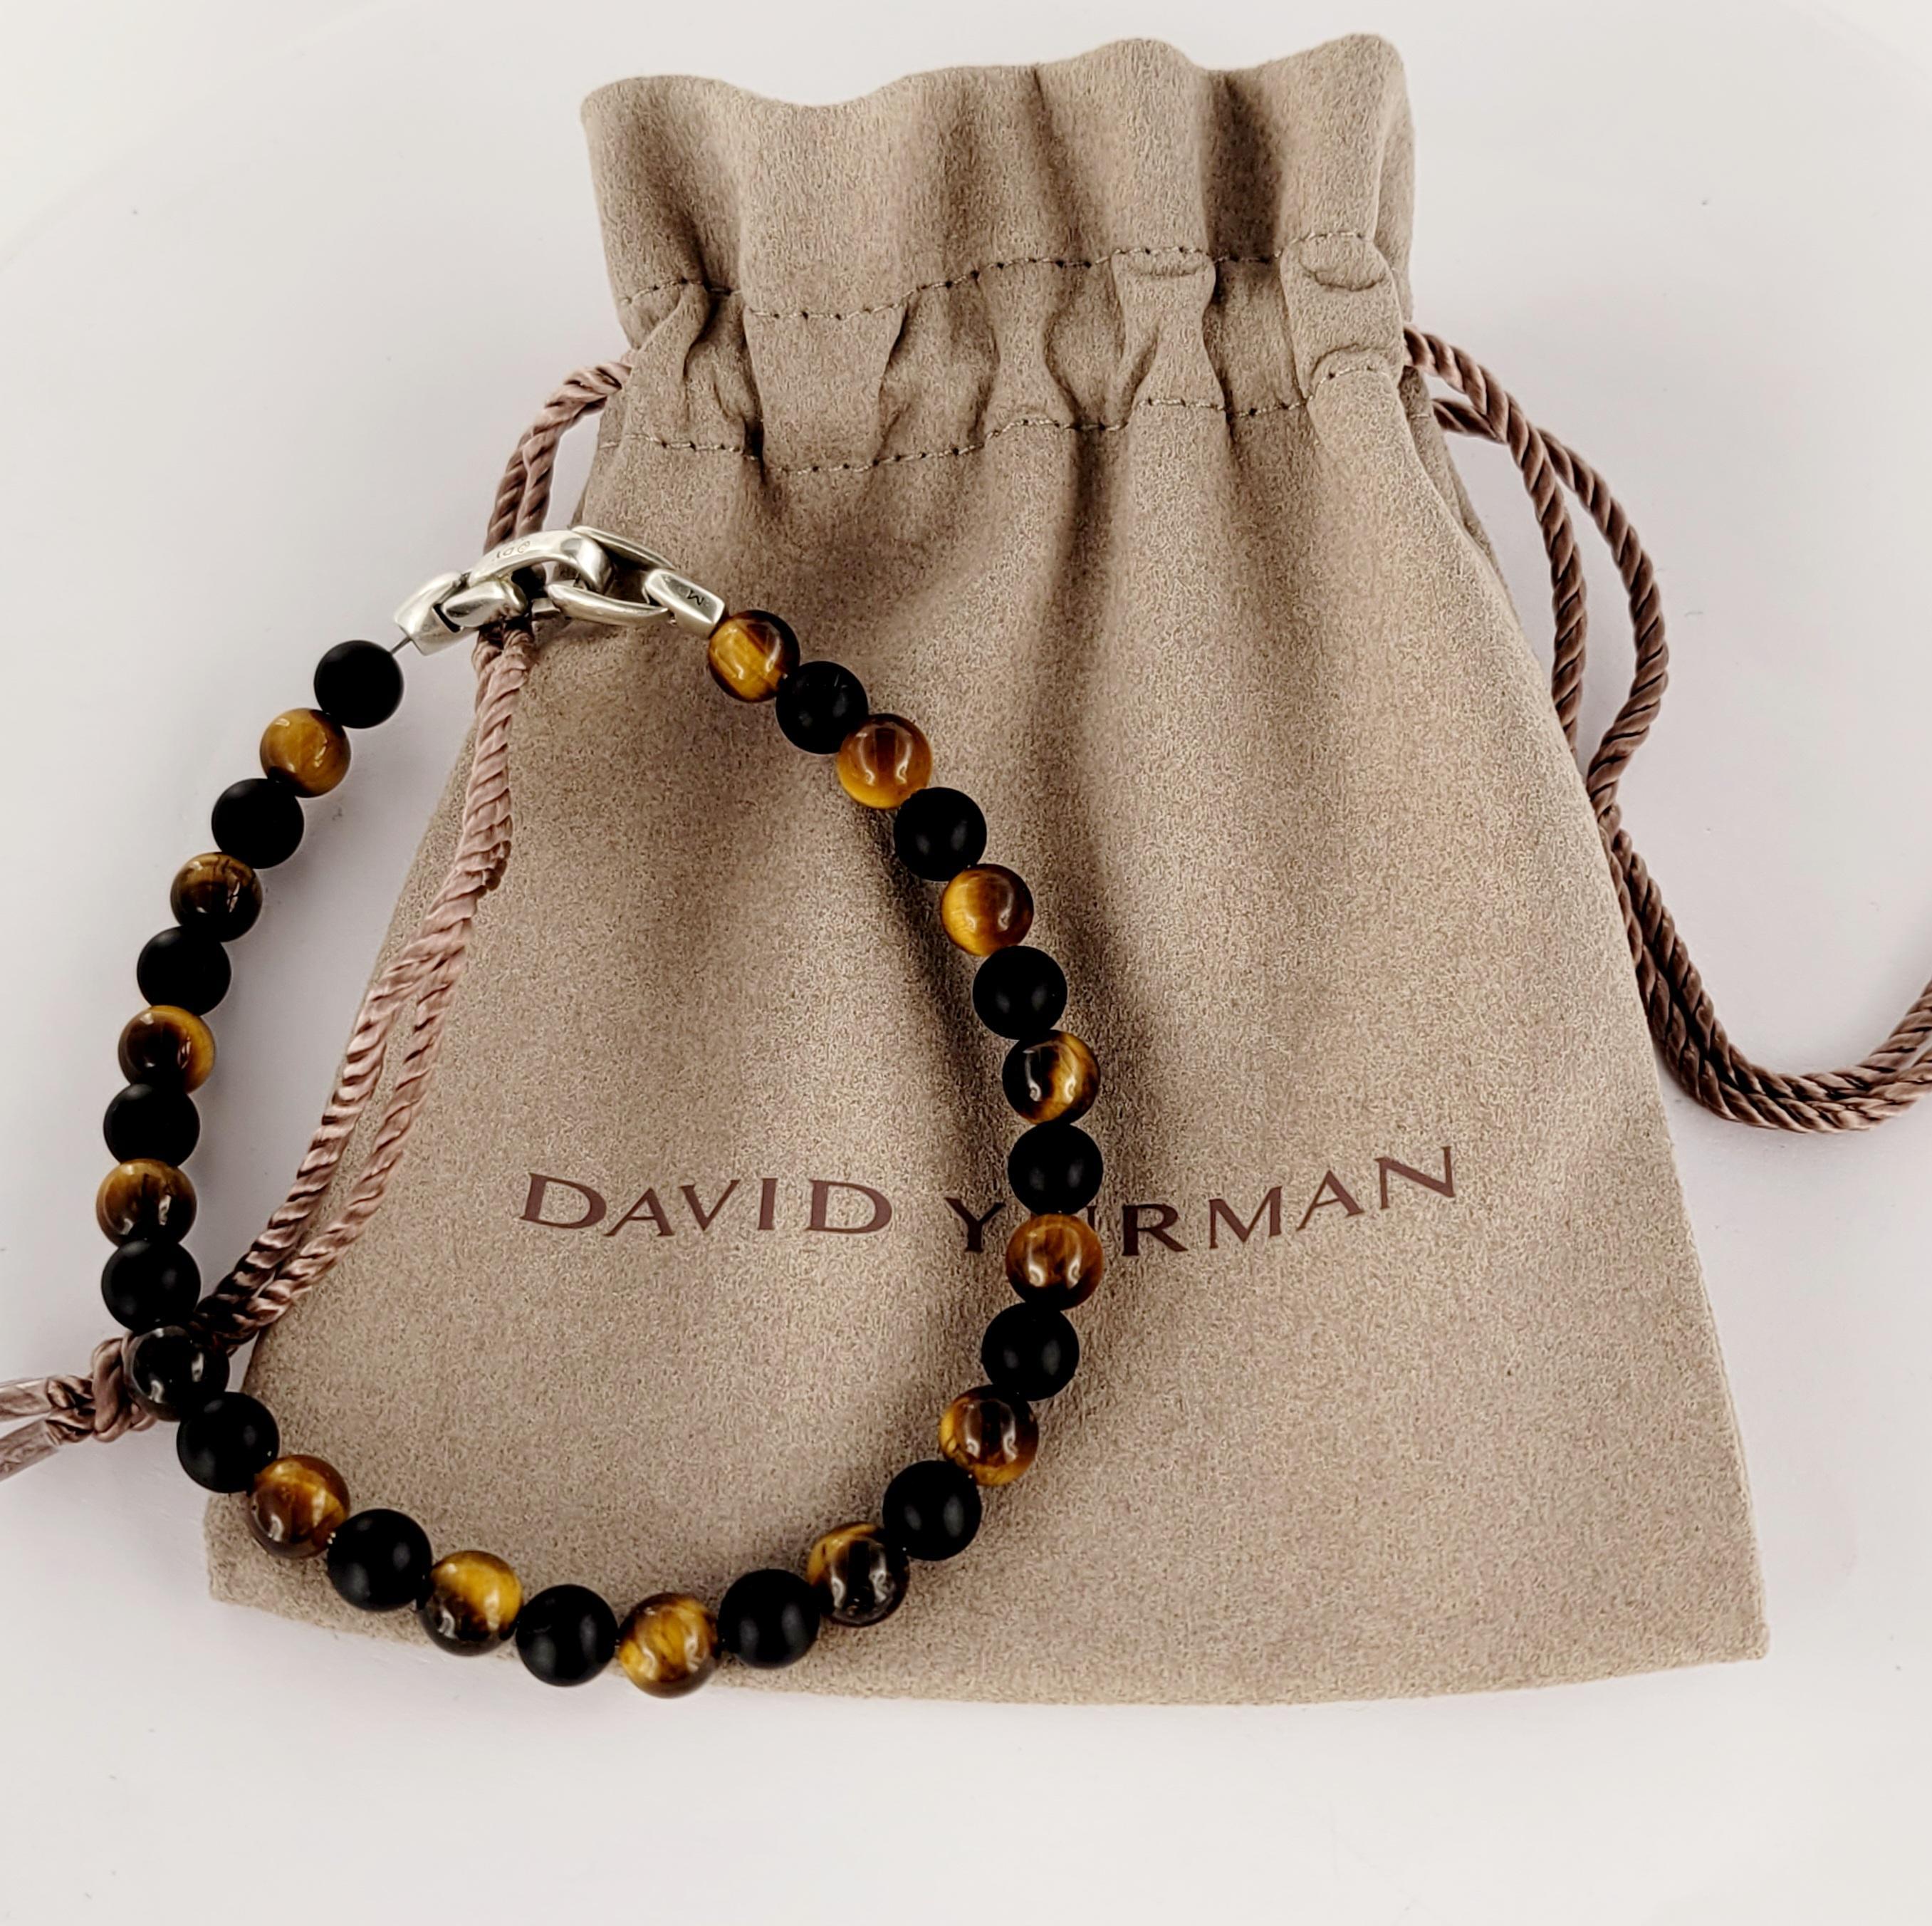 David Yurman Men's Spiritual Beads Bracelet
Style Black and Tiger-Eye 
Material Sterling Silver
Metal Purity 925
Bracelet width 6.5mm
Bracelet Length 8.5'' from end to end
Bracelet Weight 13.2gr
Gender men's
Condition New, never worn
Comes with